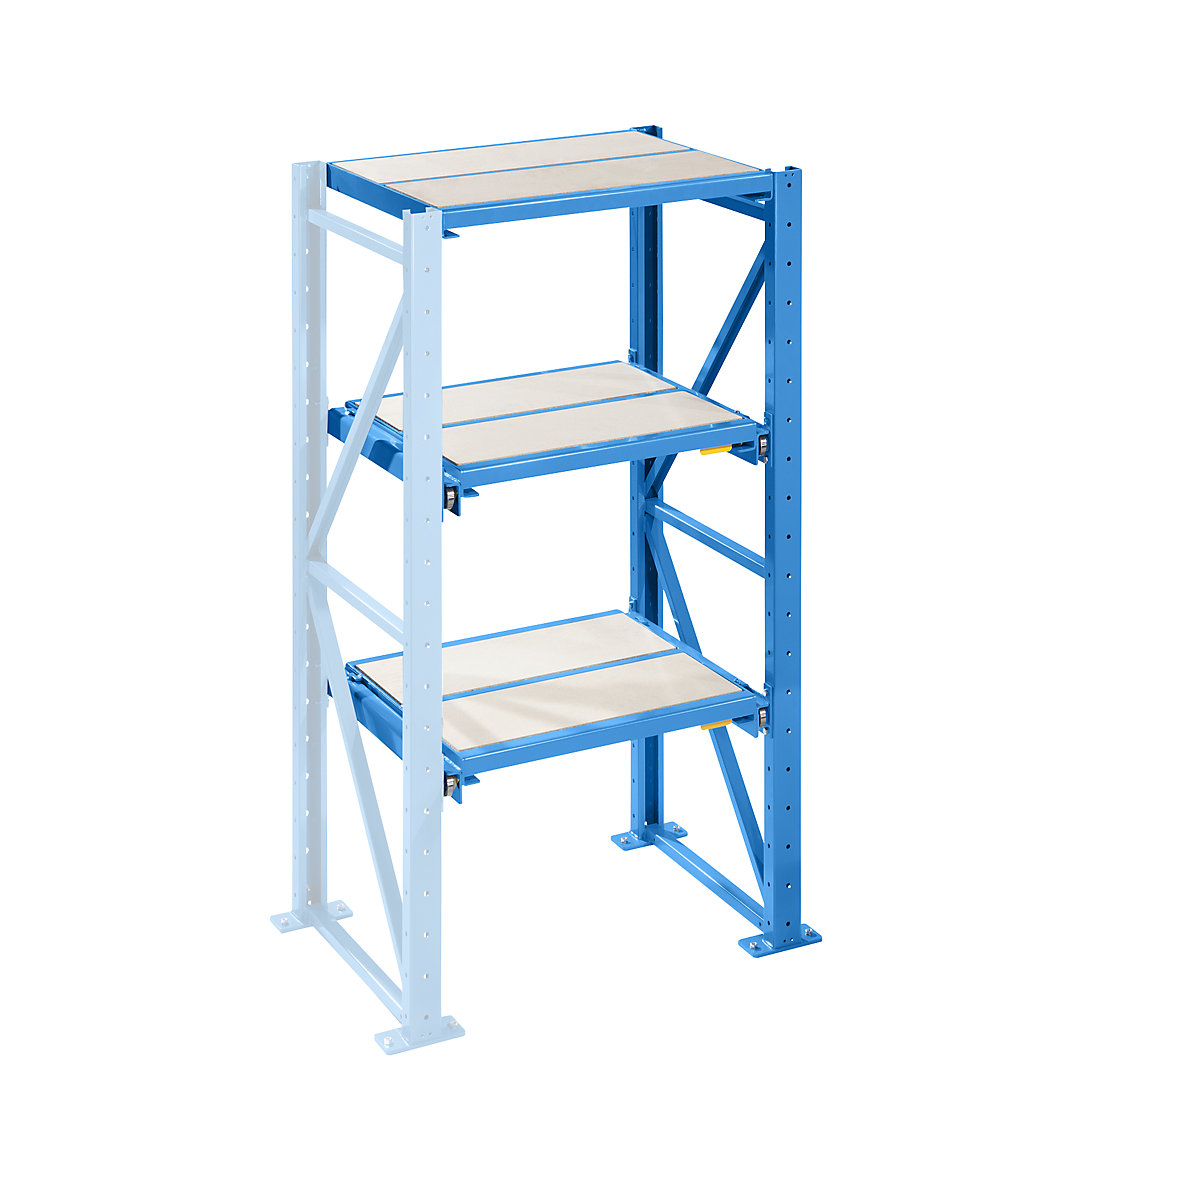 Extension Shelf Unit, Full Extension Slides For Pull Out Shelving Unit